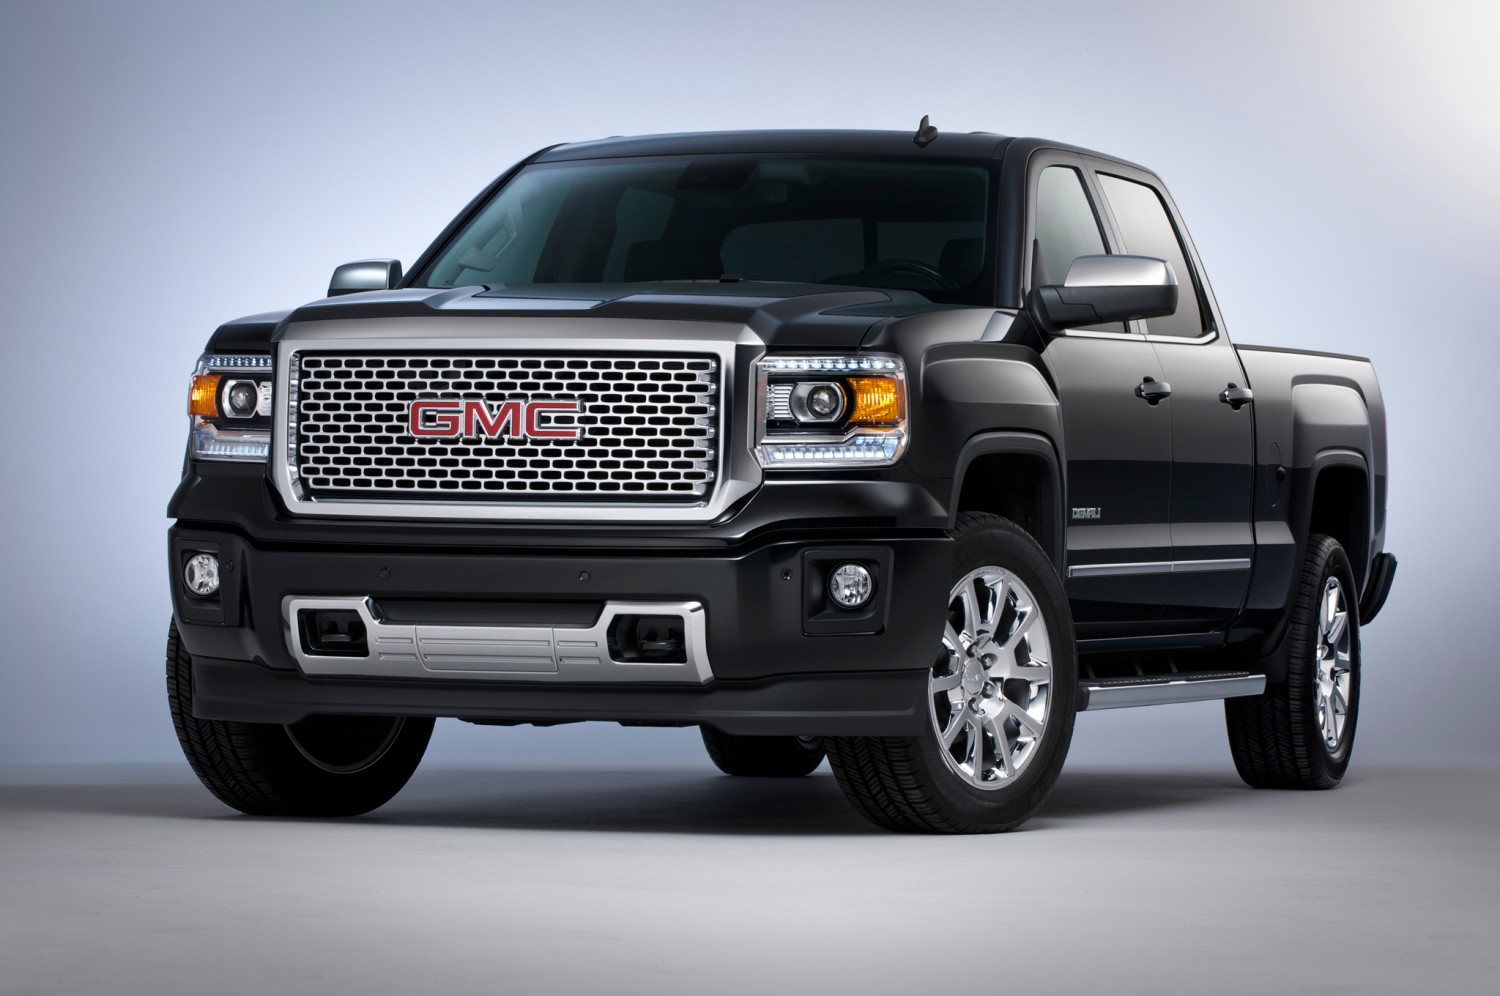 Guide and Manual: 2014 GMC Sierra 1500 Service/Owner manual